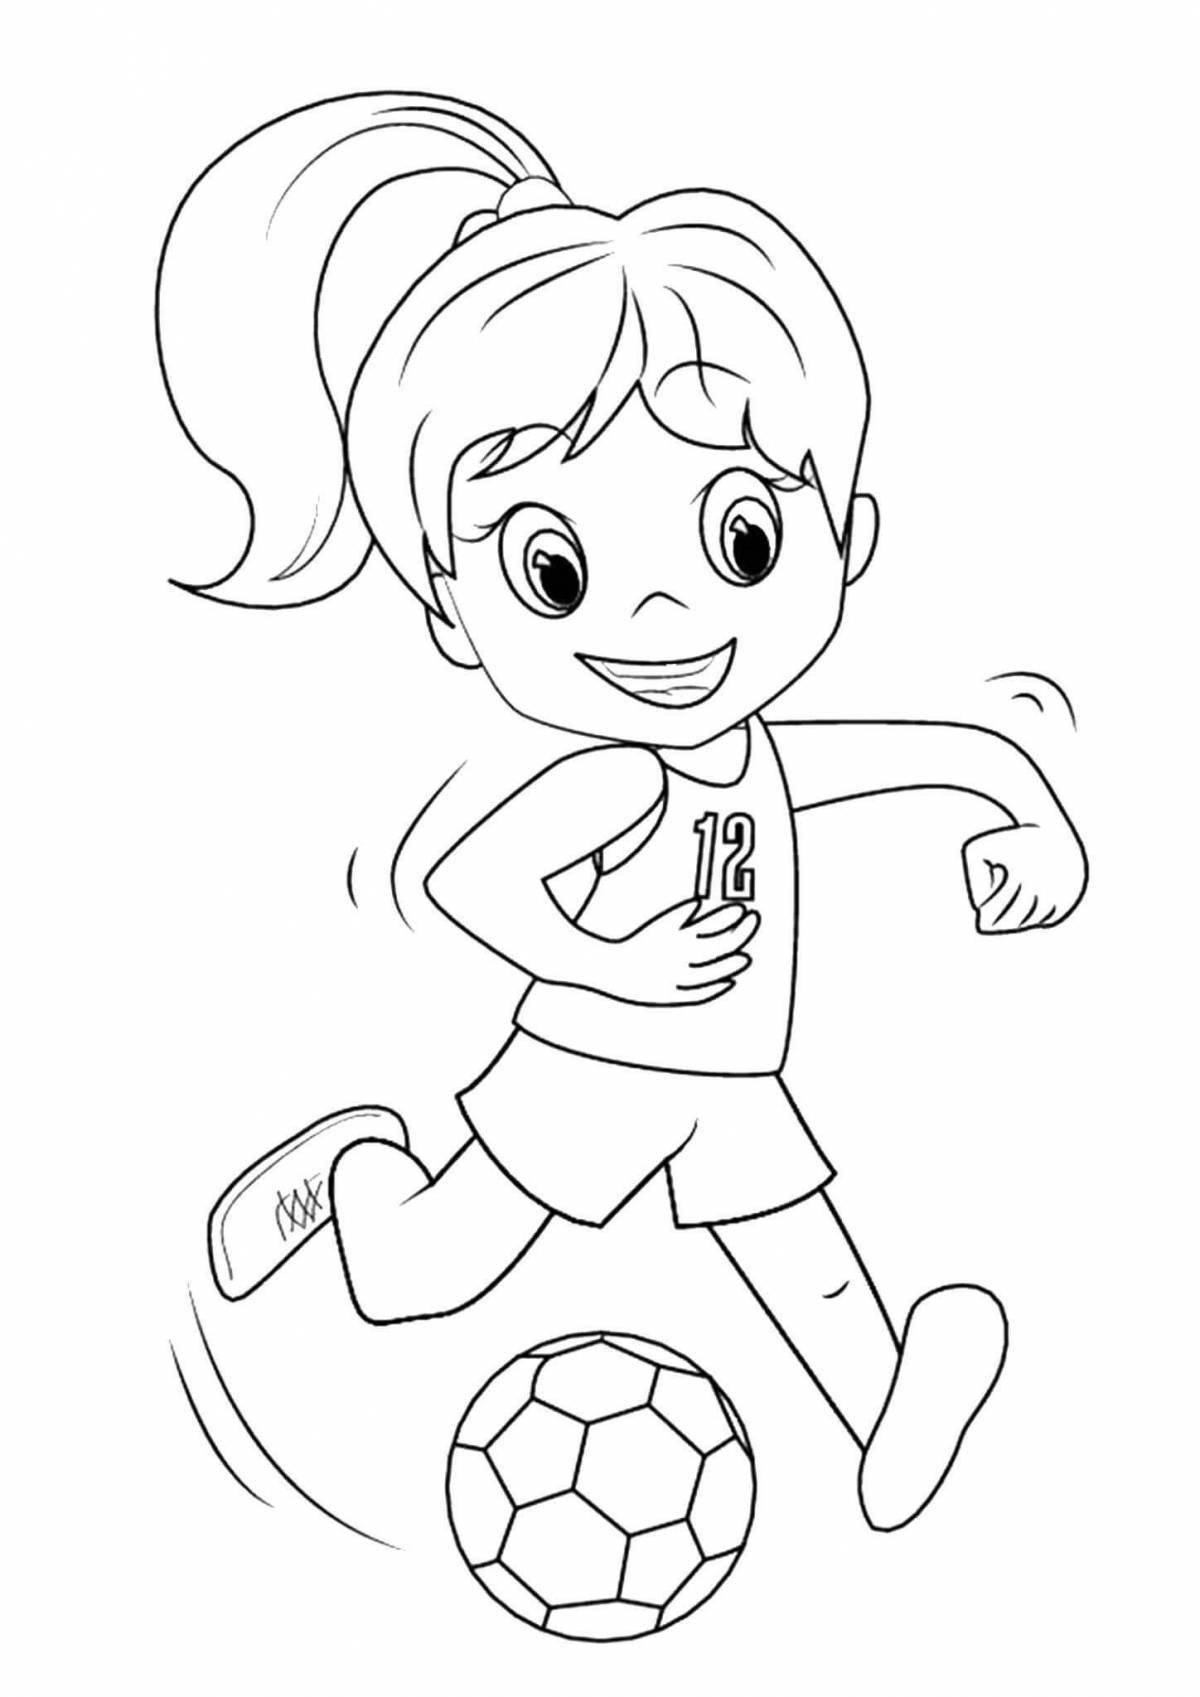 Colorful sports coloring book for kindergarten